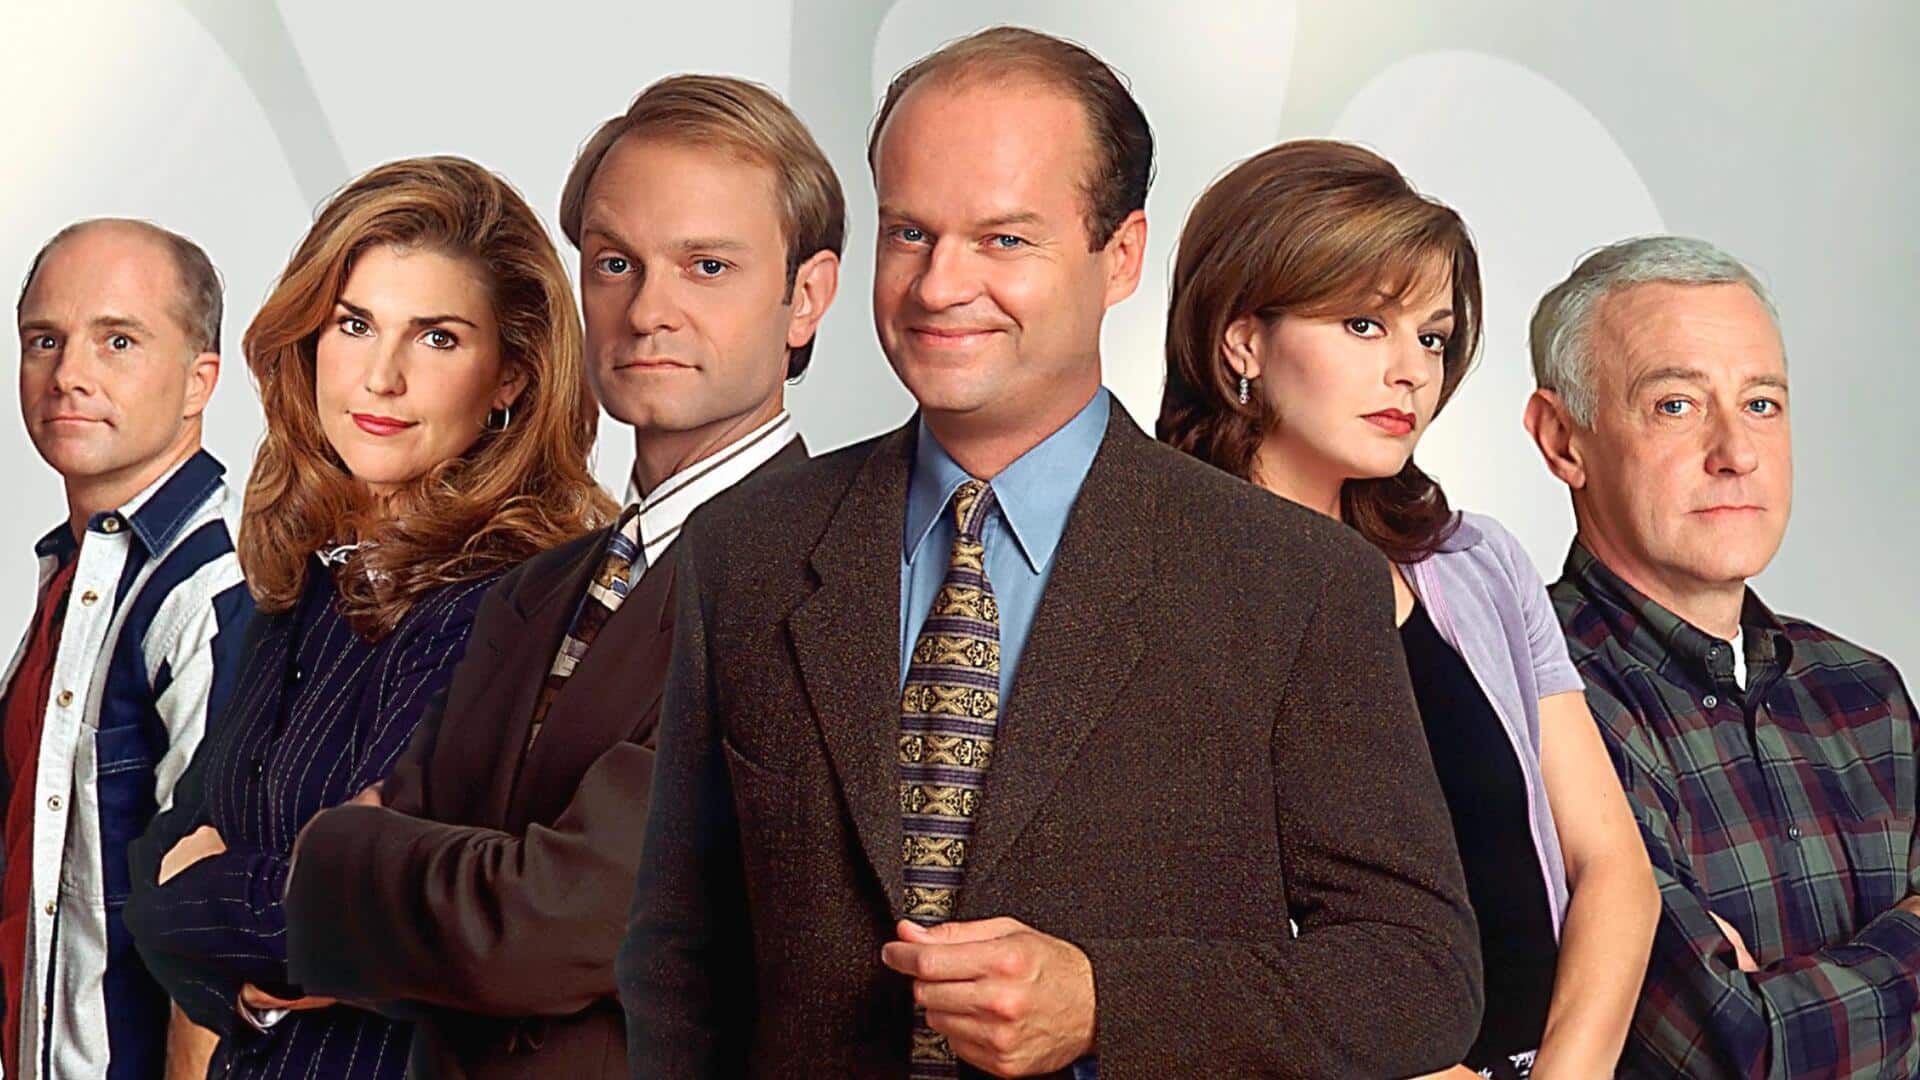 'Frasier' set for revival: All about the '90s sitcom